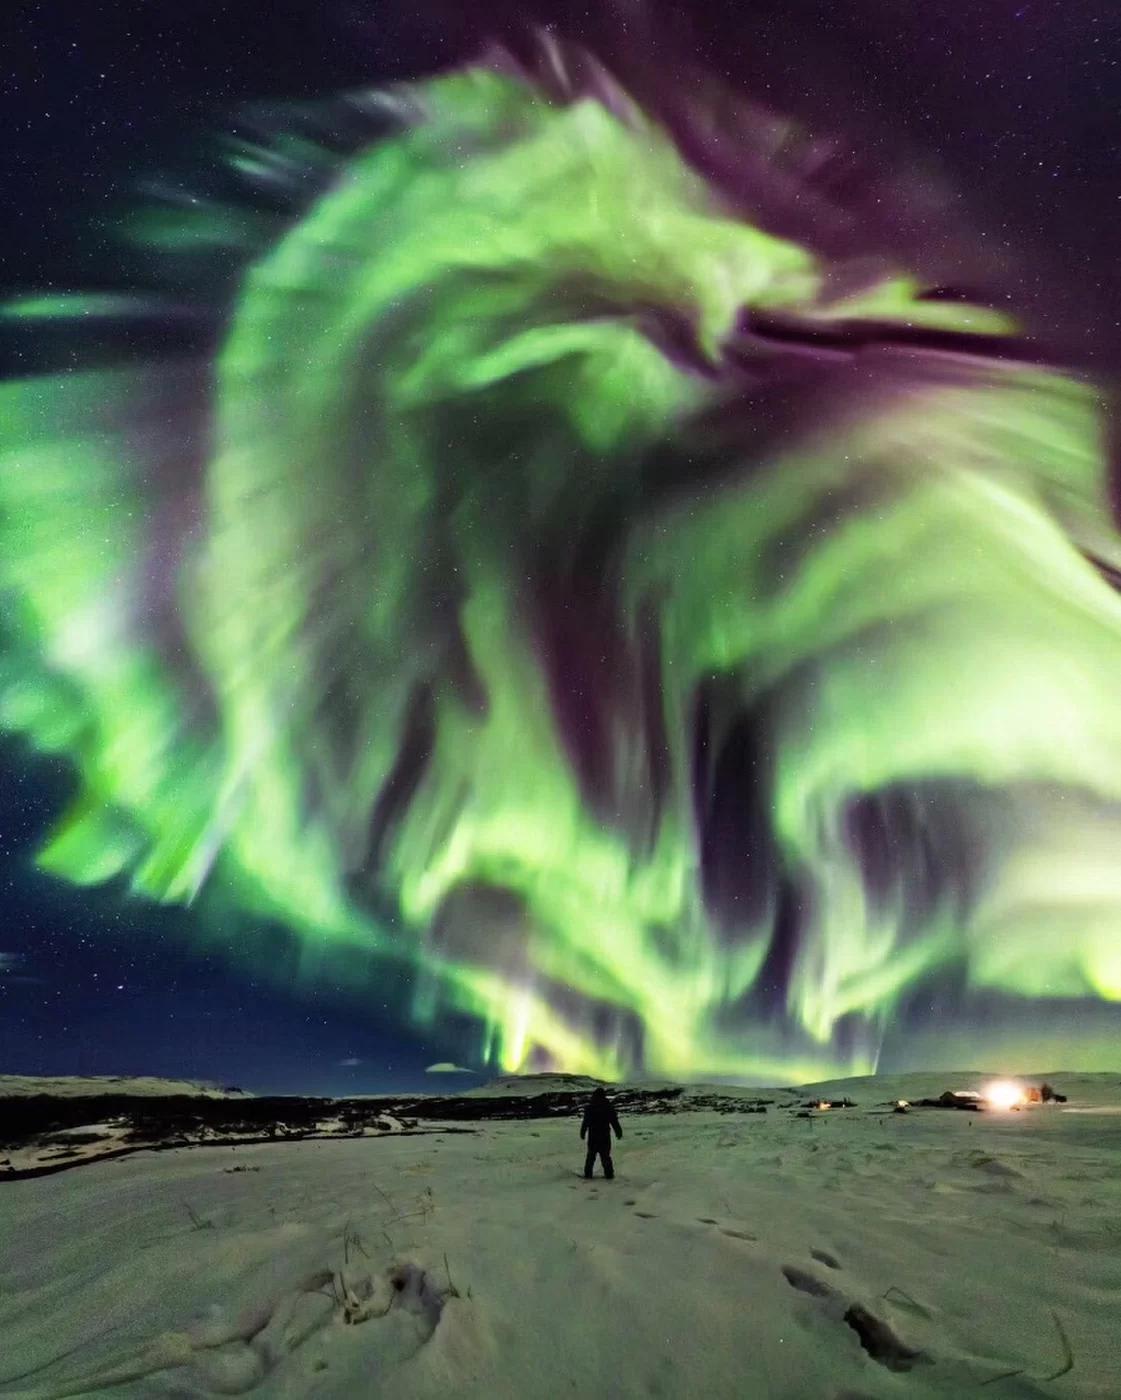 Holy smokes! Green Dragon Aurora over Iceland, "Kukulkan the Great Feathered Serpent God" has returned!